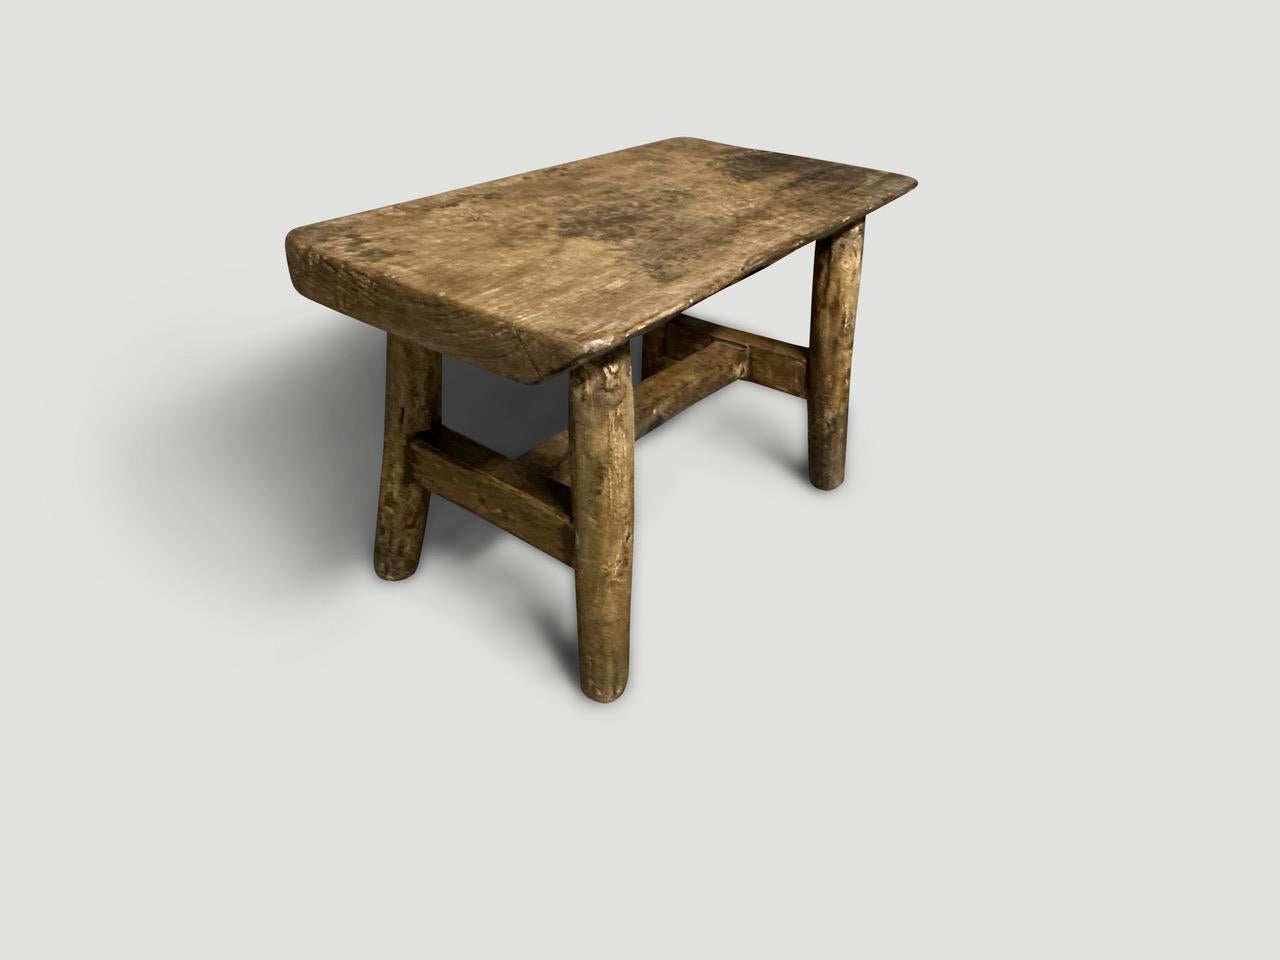 Andrianna Shamaris Antique Side Table or Bench In Excellent Condition For Sale In New York, NY